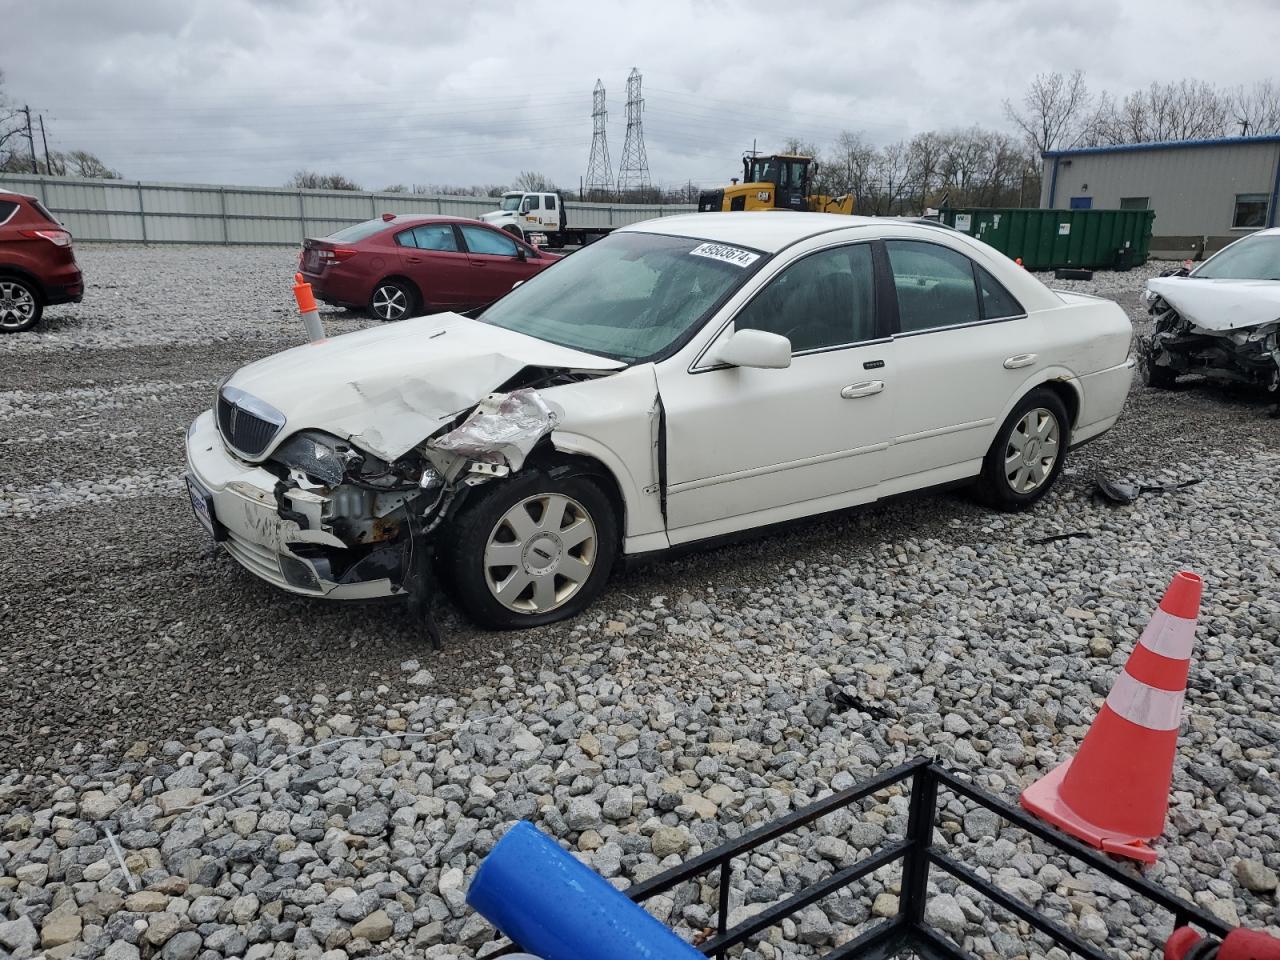  Salvage Lincoln Ls Series